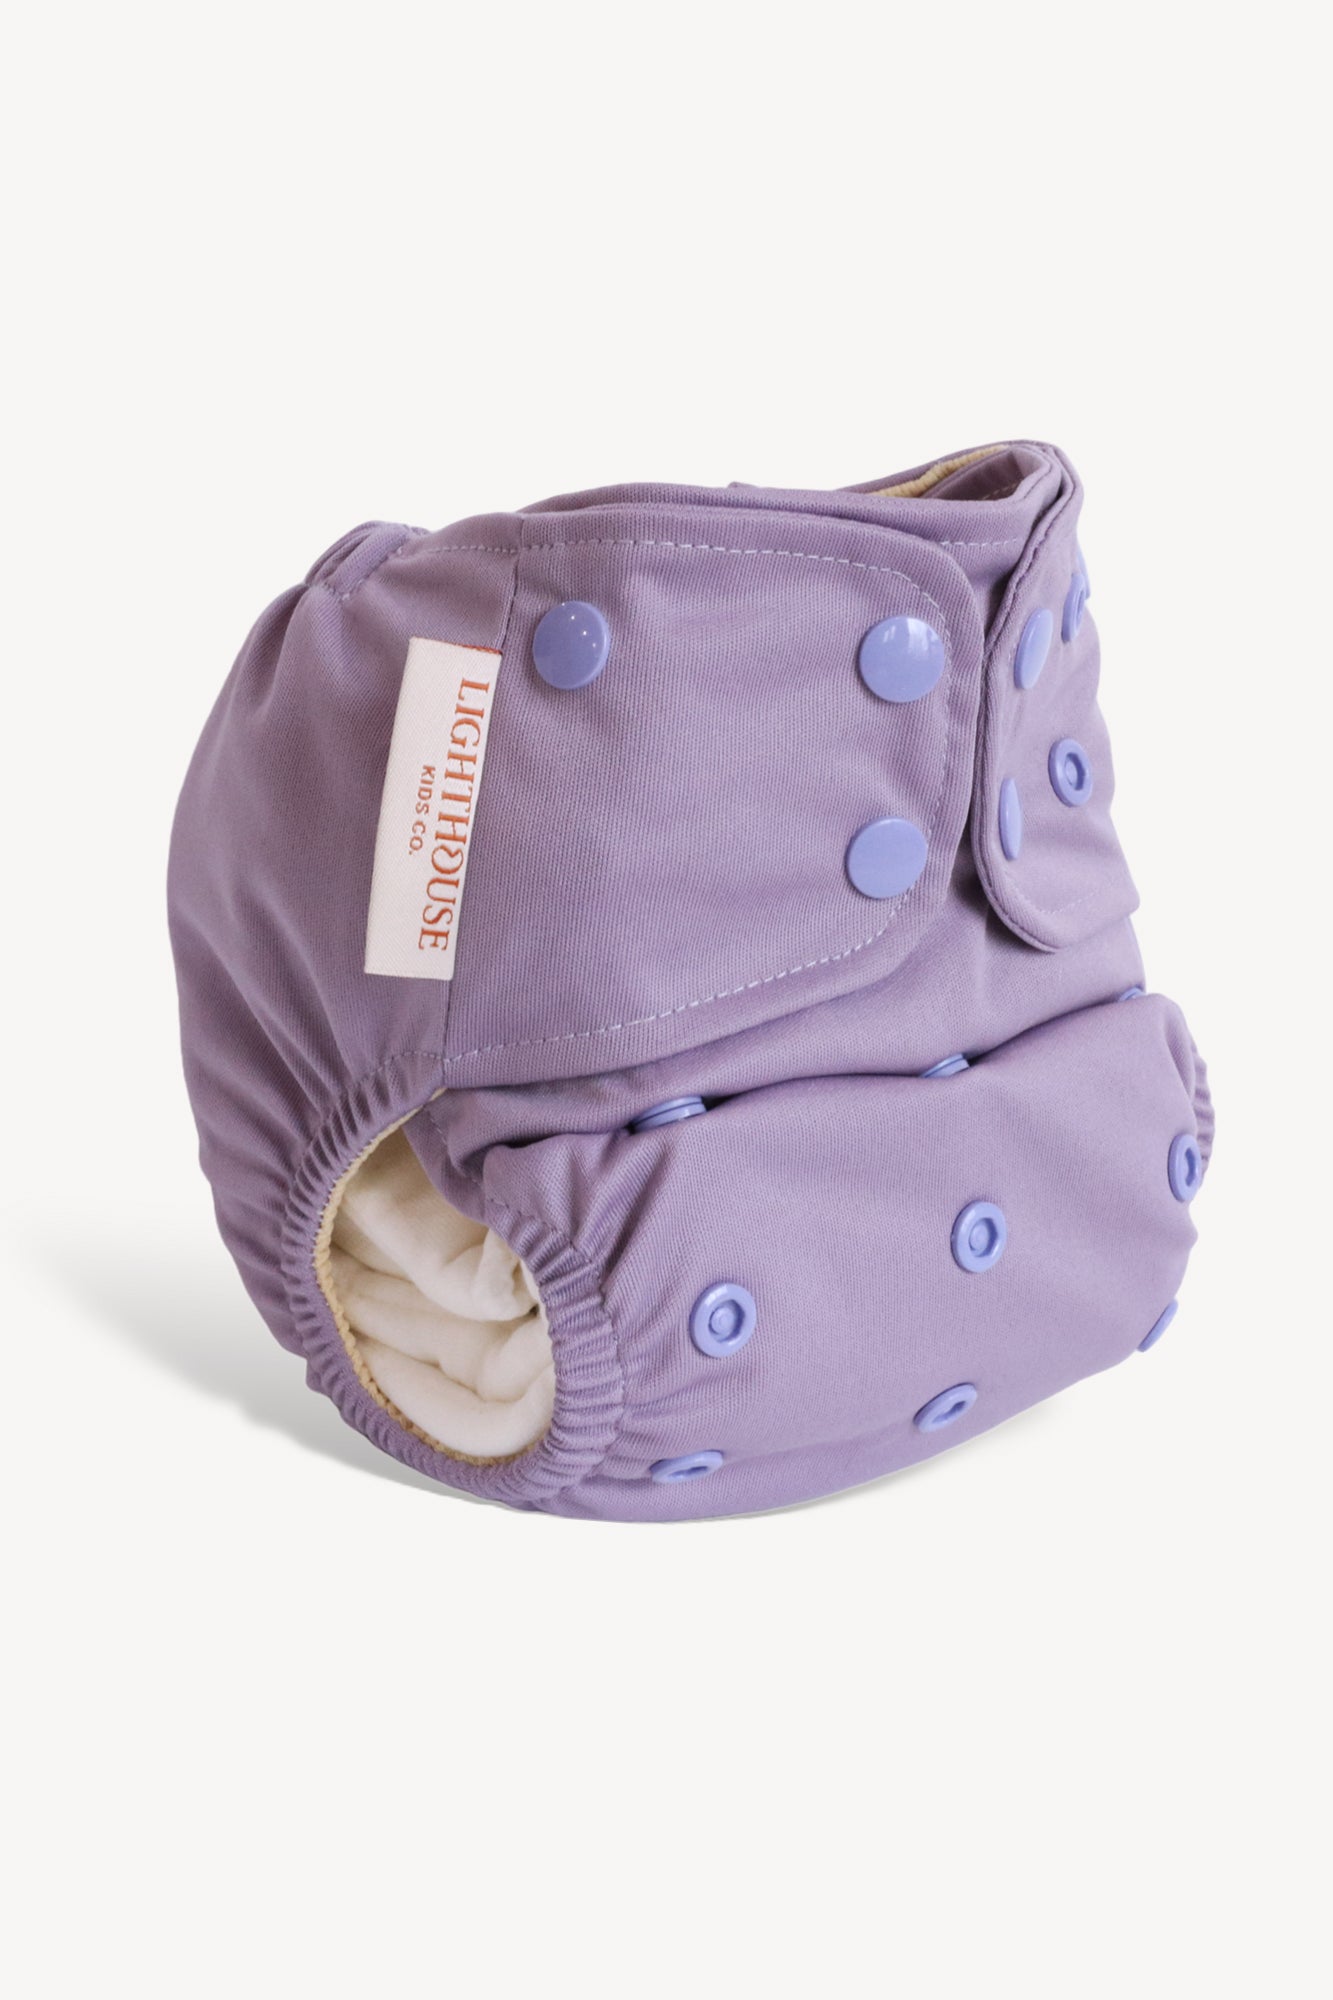 Pocket Cloth Diaper with Athletic Wicking Jersey - Lilac – Cloth Diapers -  Lighthouse Kids